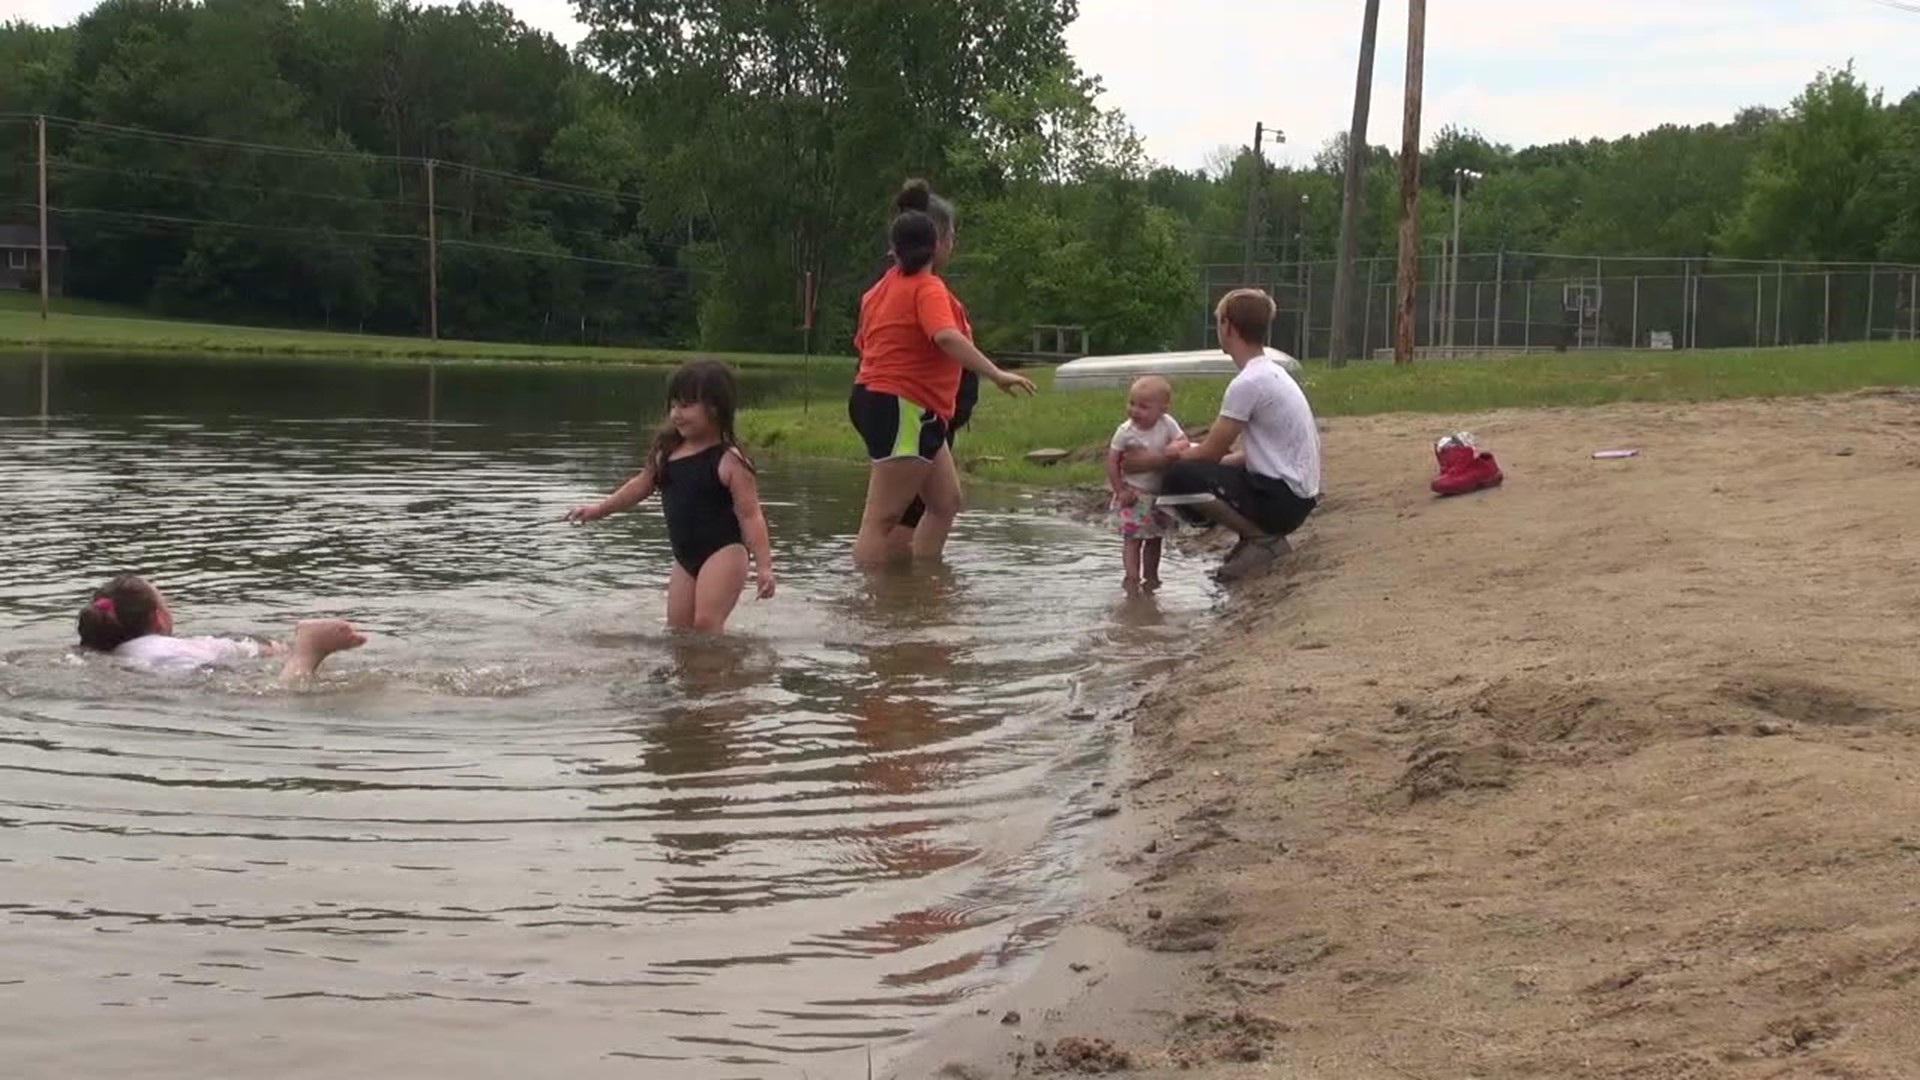 A park is Susquehanna County now has a place for families to swim safely and close to home.